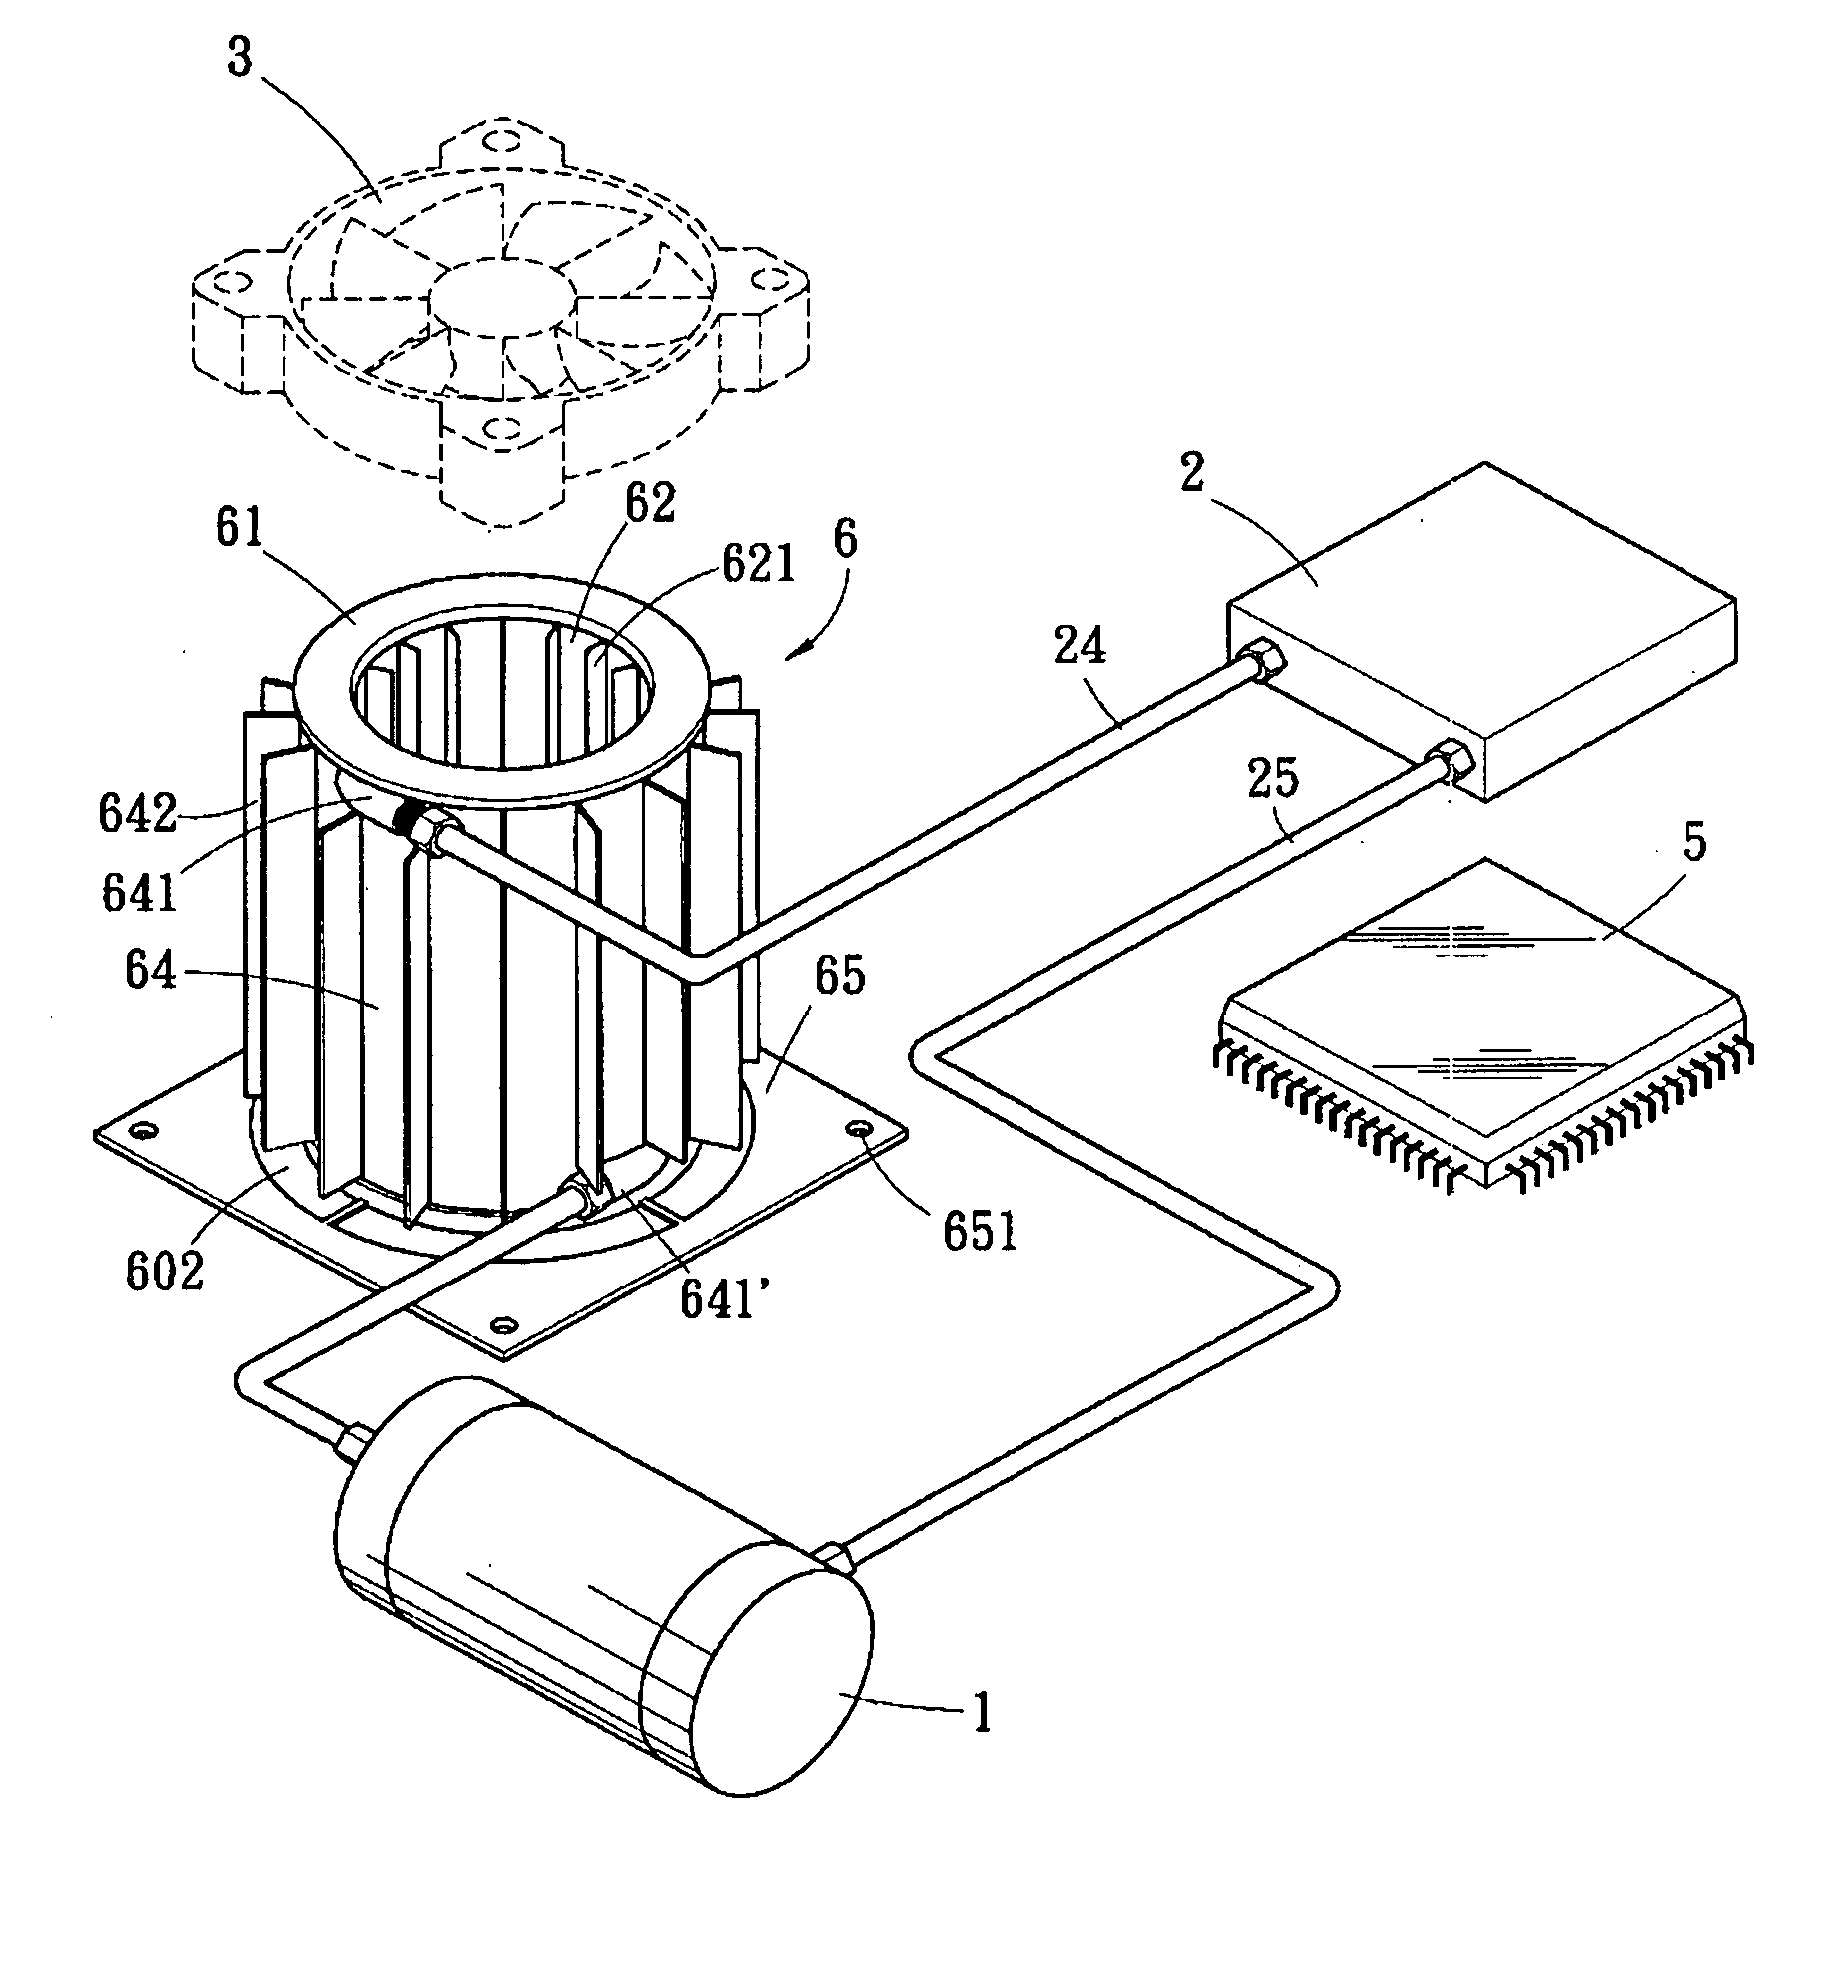 Structure of radiator